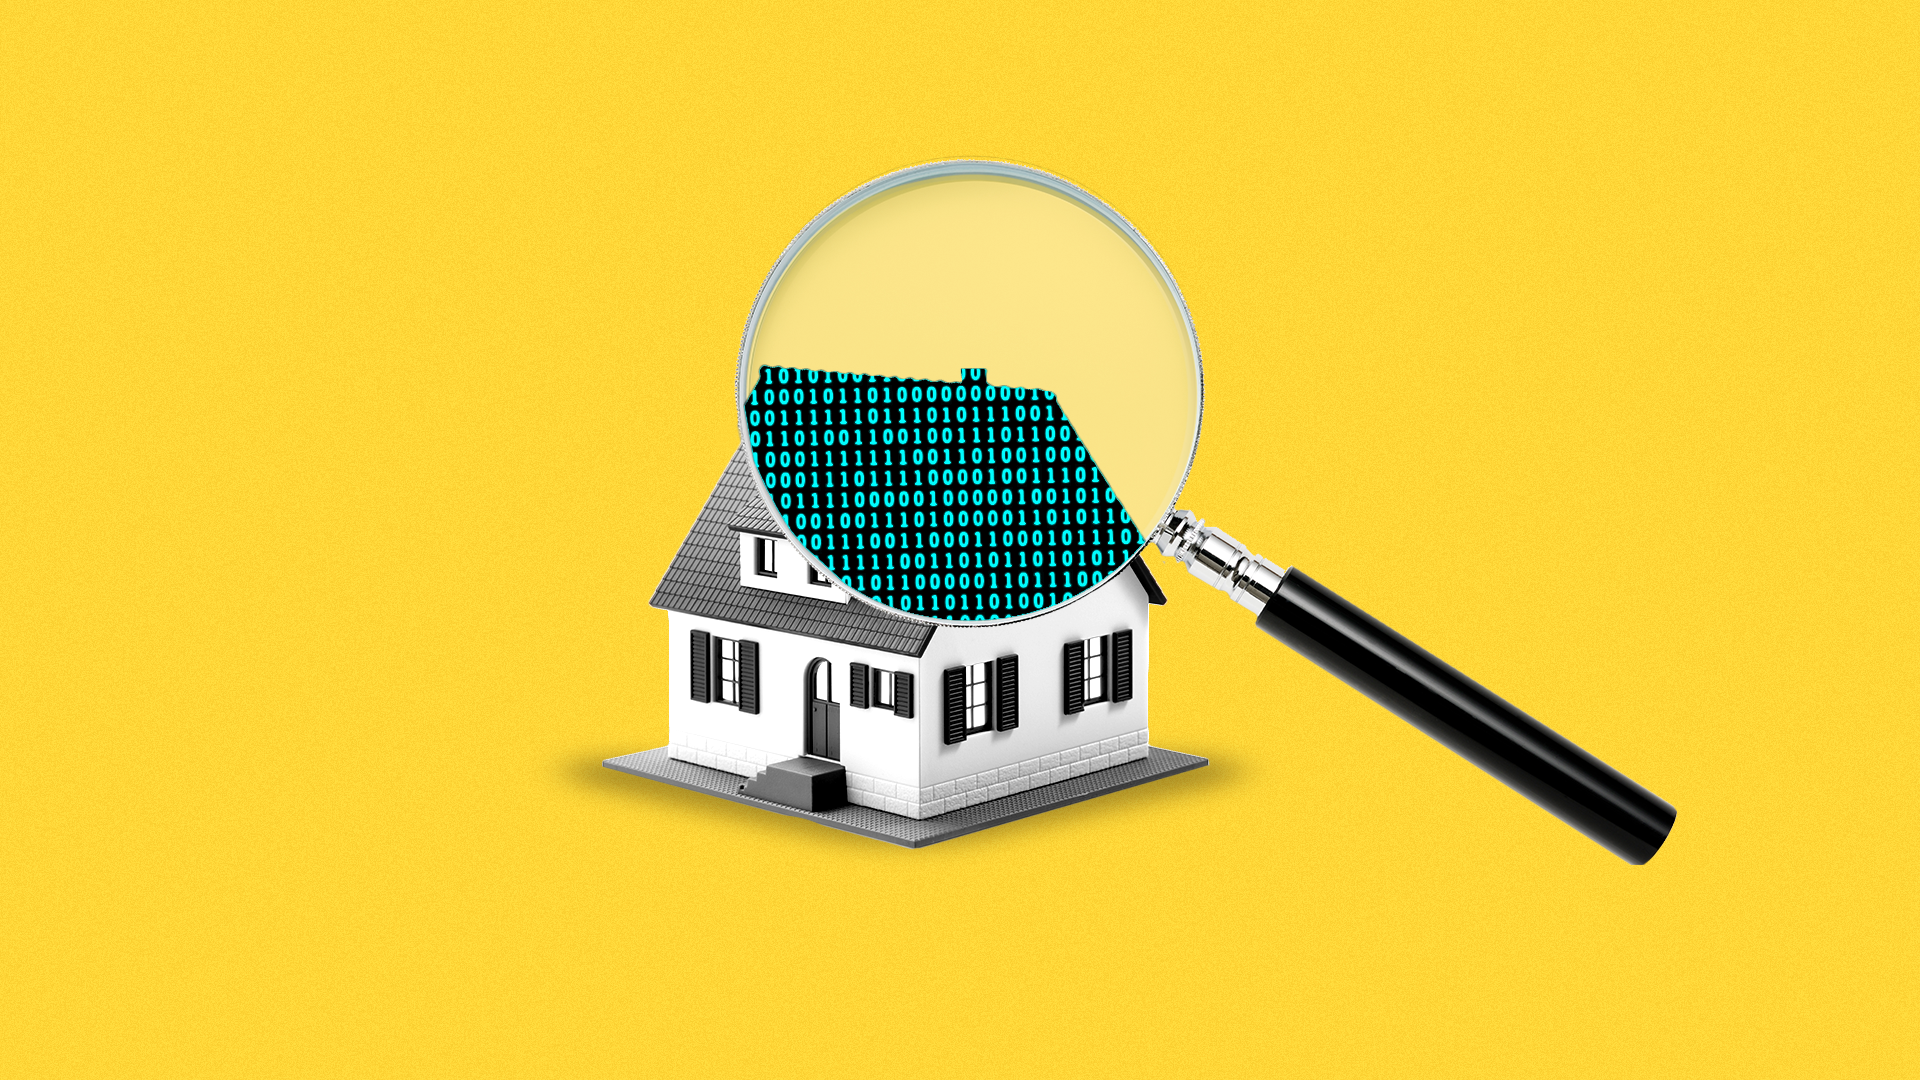 Illustration of a house with a magnifying glass revealing binary code